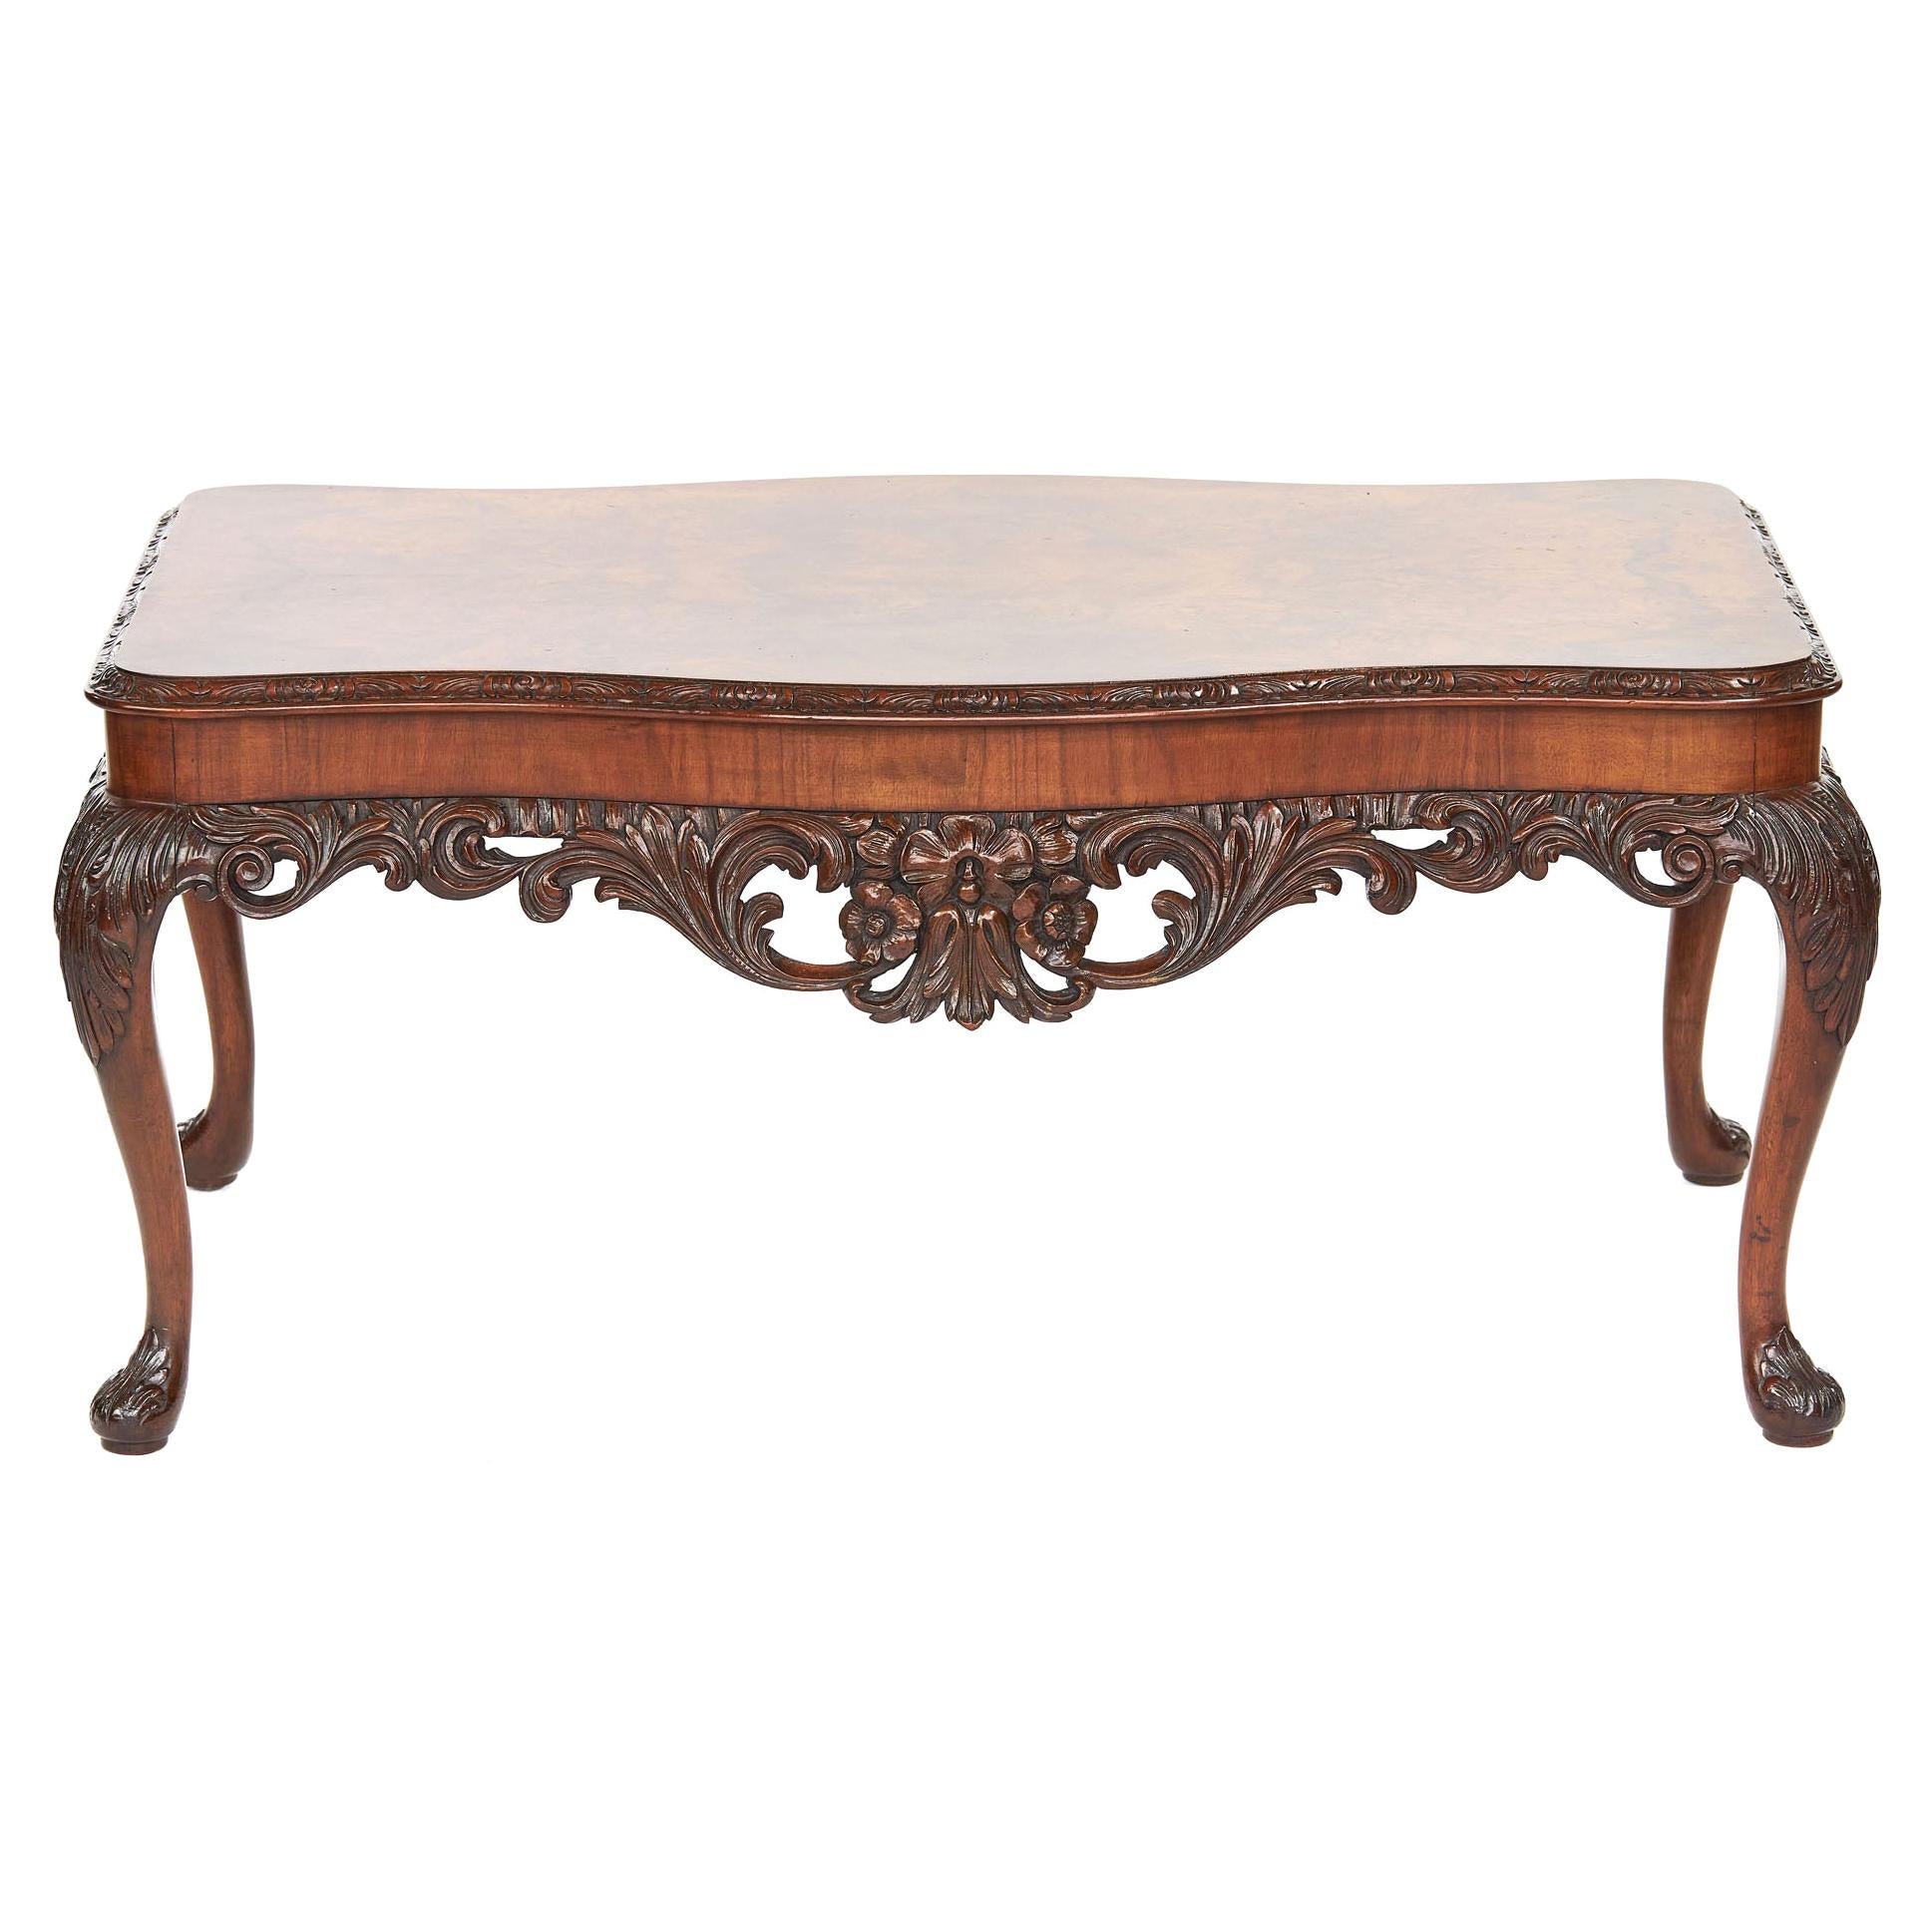 Antique Carved Burr Walnut Coffee Table